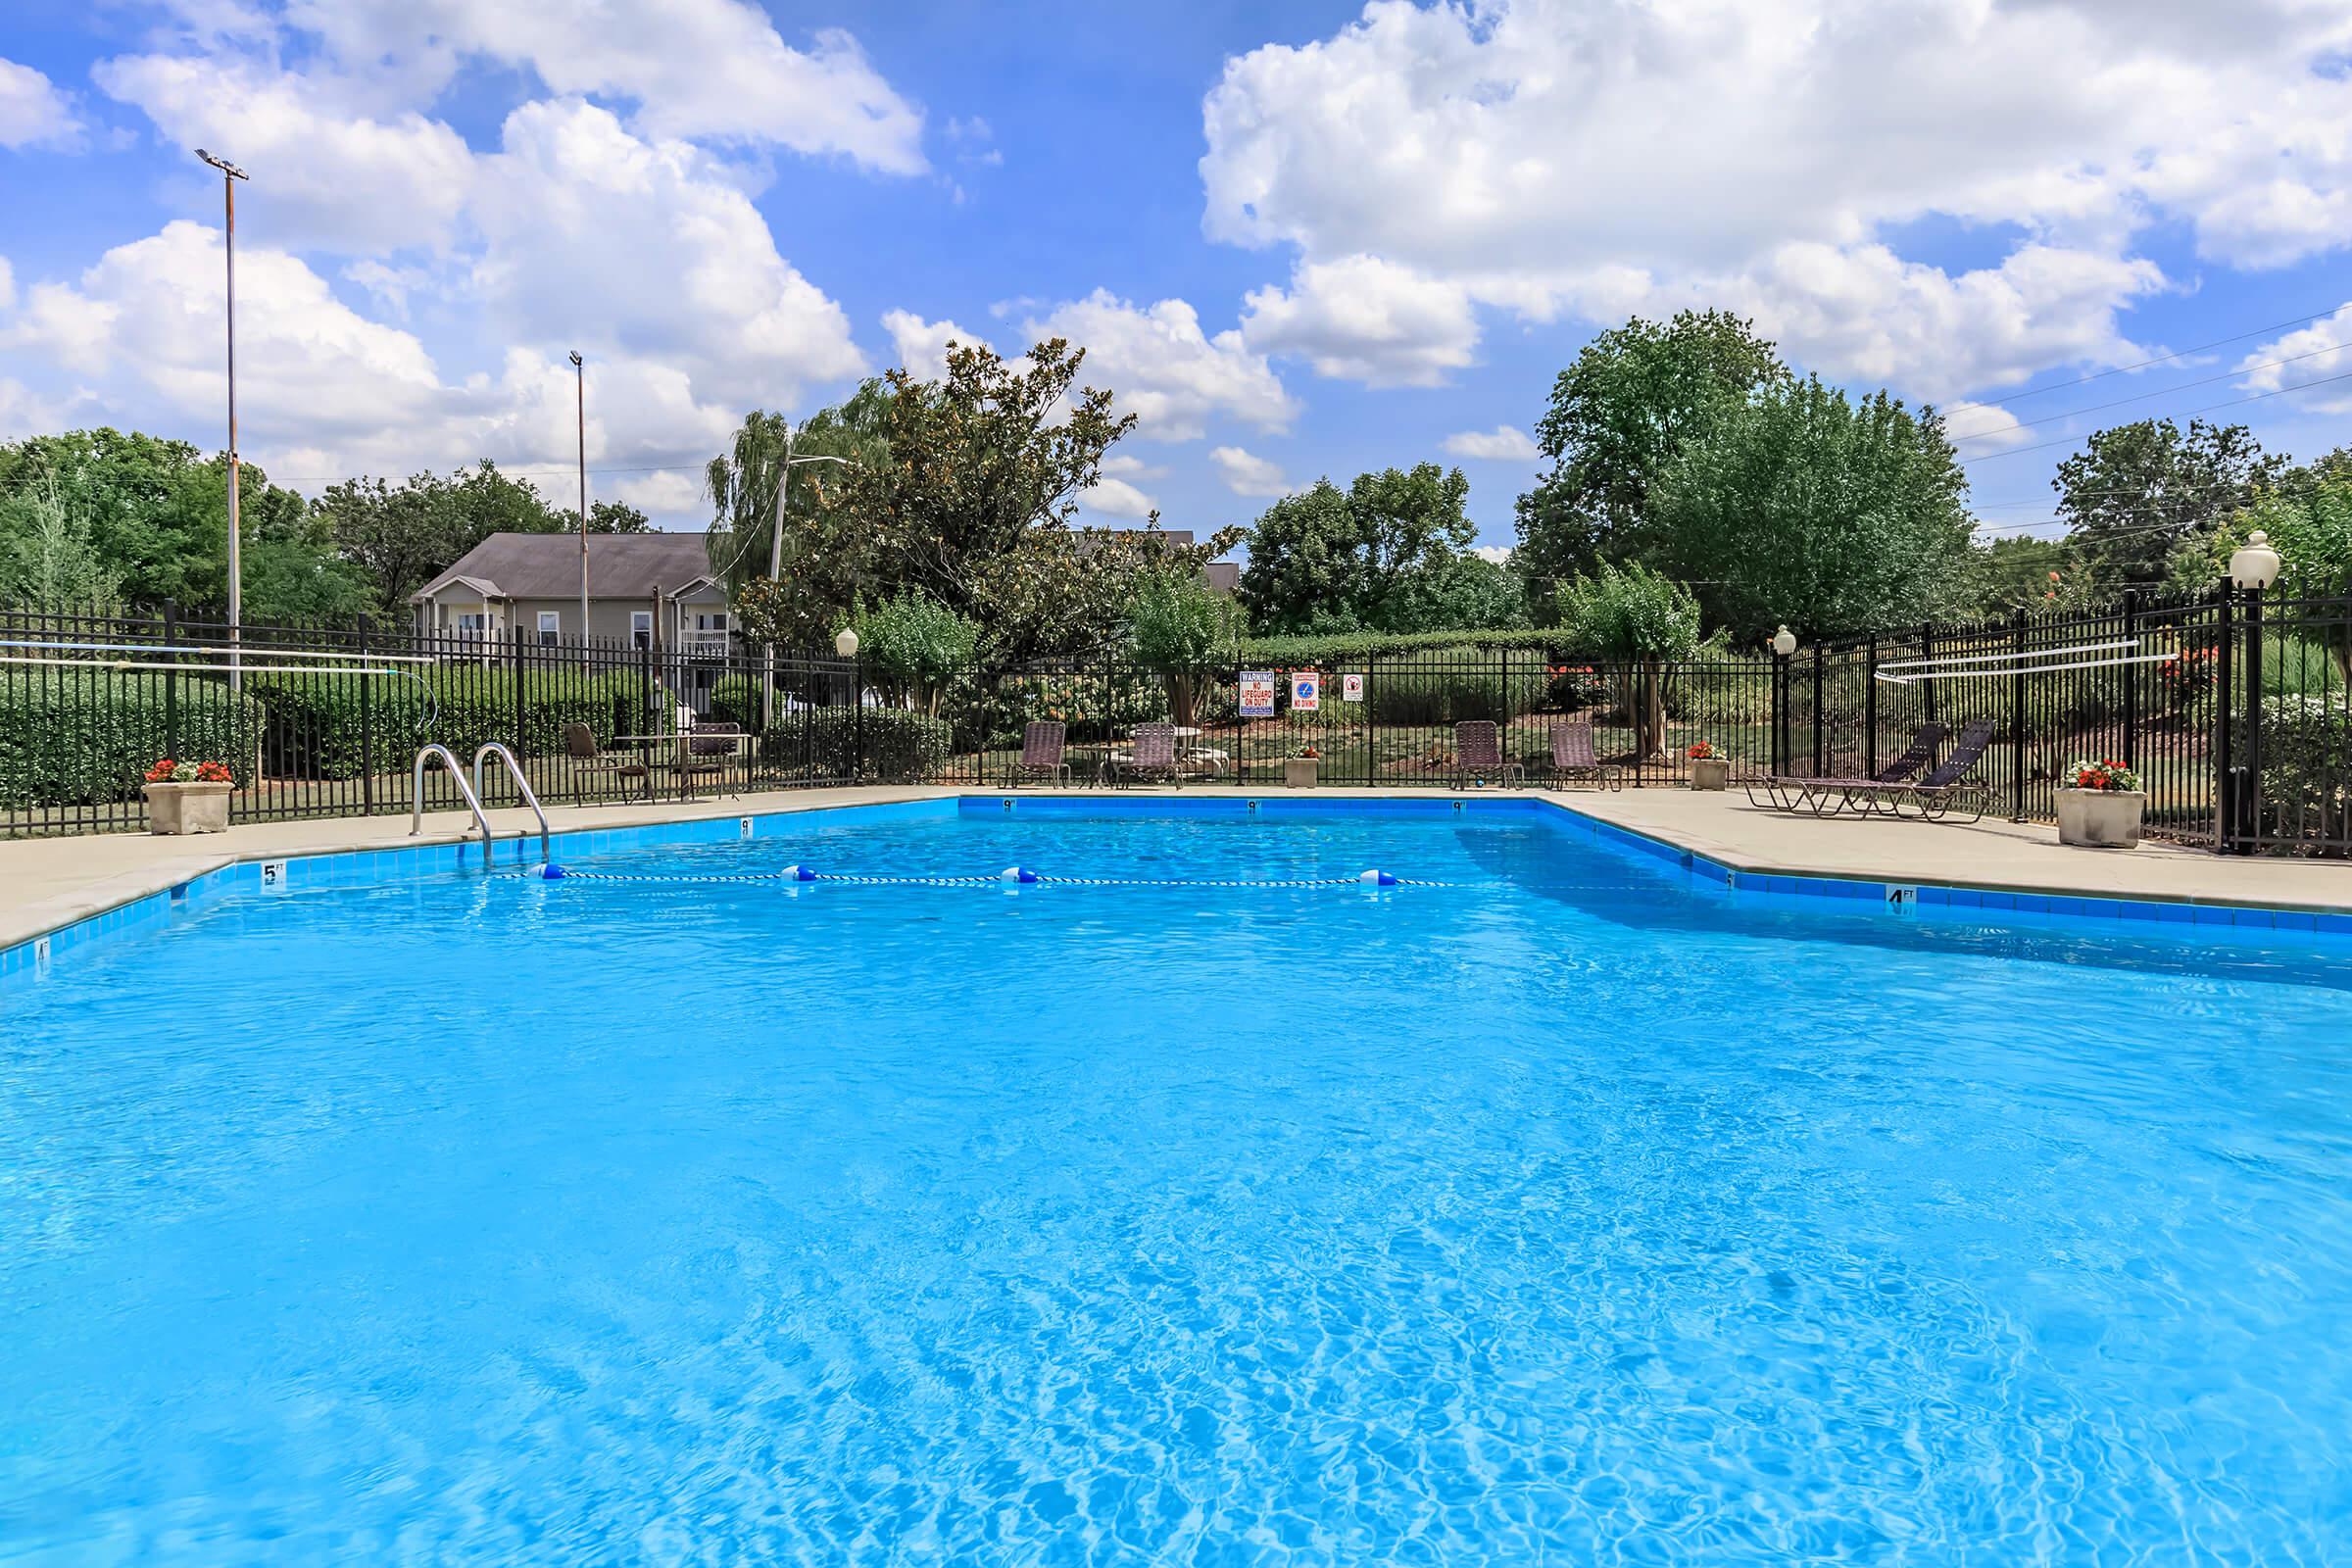 Take A Dip In our Shimmering Swimming Pool at Chase Cove Apartments